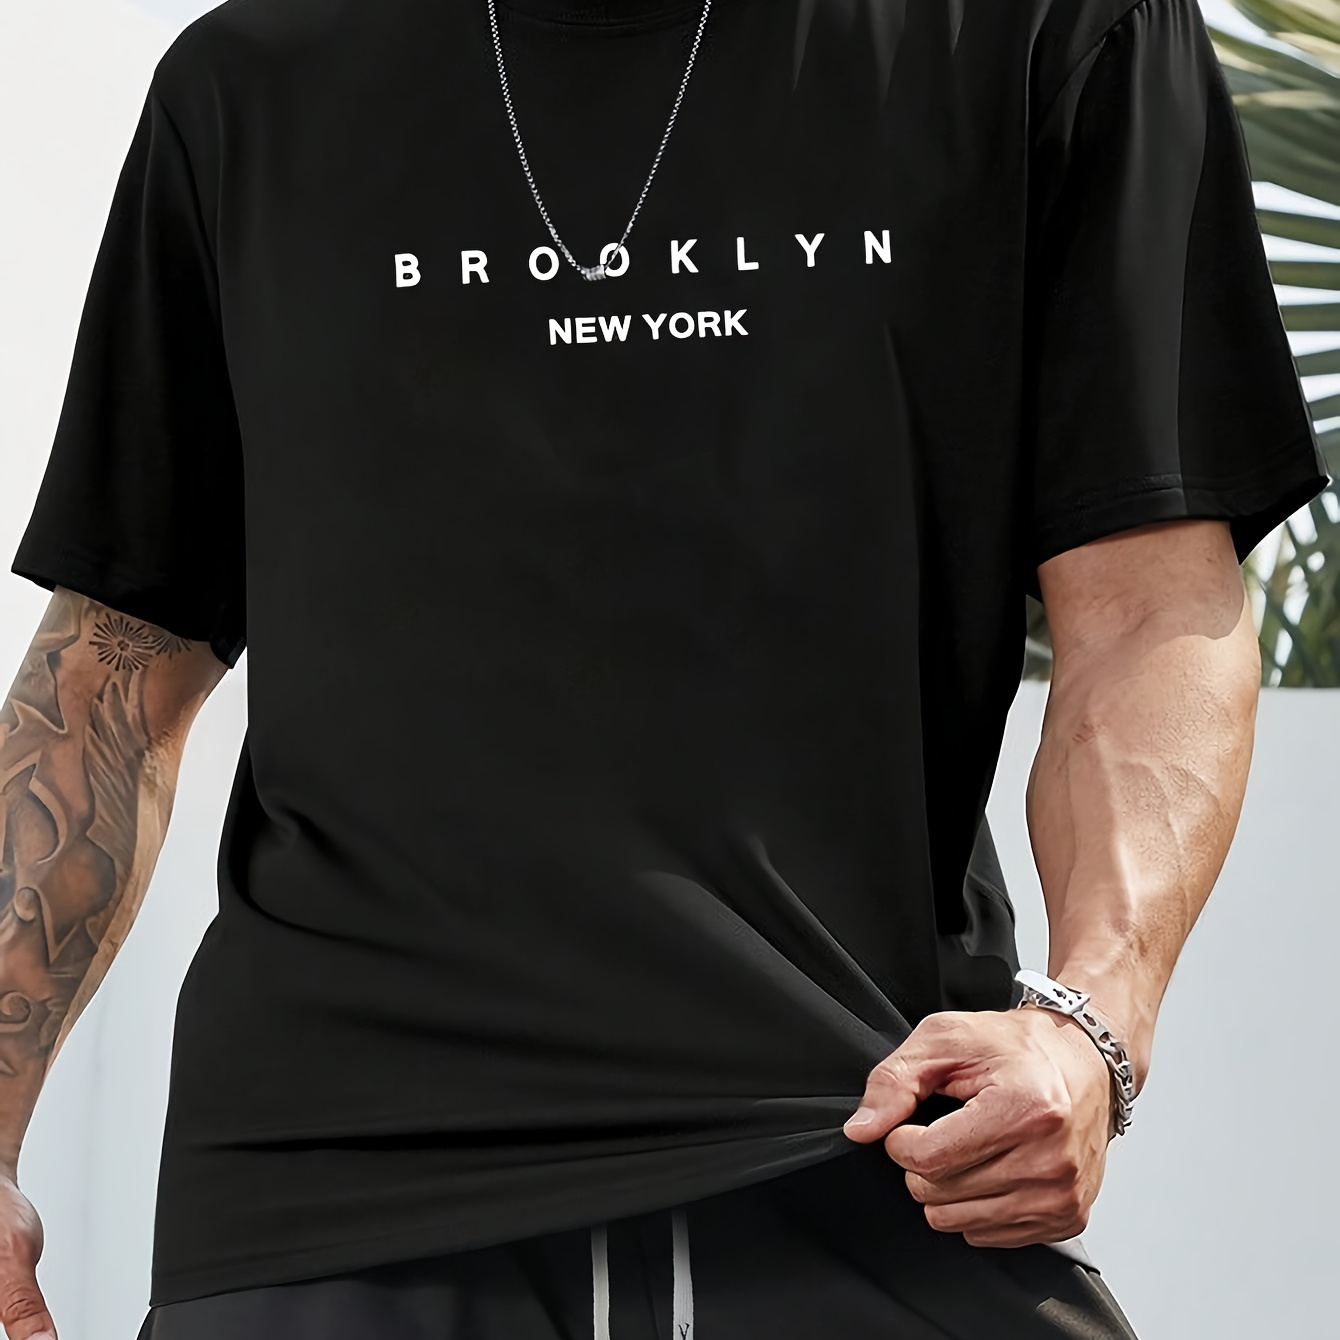 

Brooklyn Graphic Men's Short Sleeve T-shirt, Comfy Stretchy Trendy Tees For Summer, Casual Daily Style Fashion Clothing